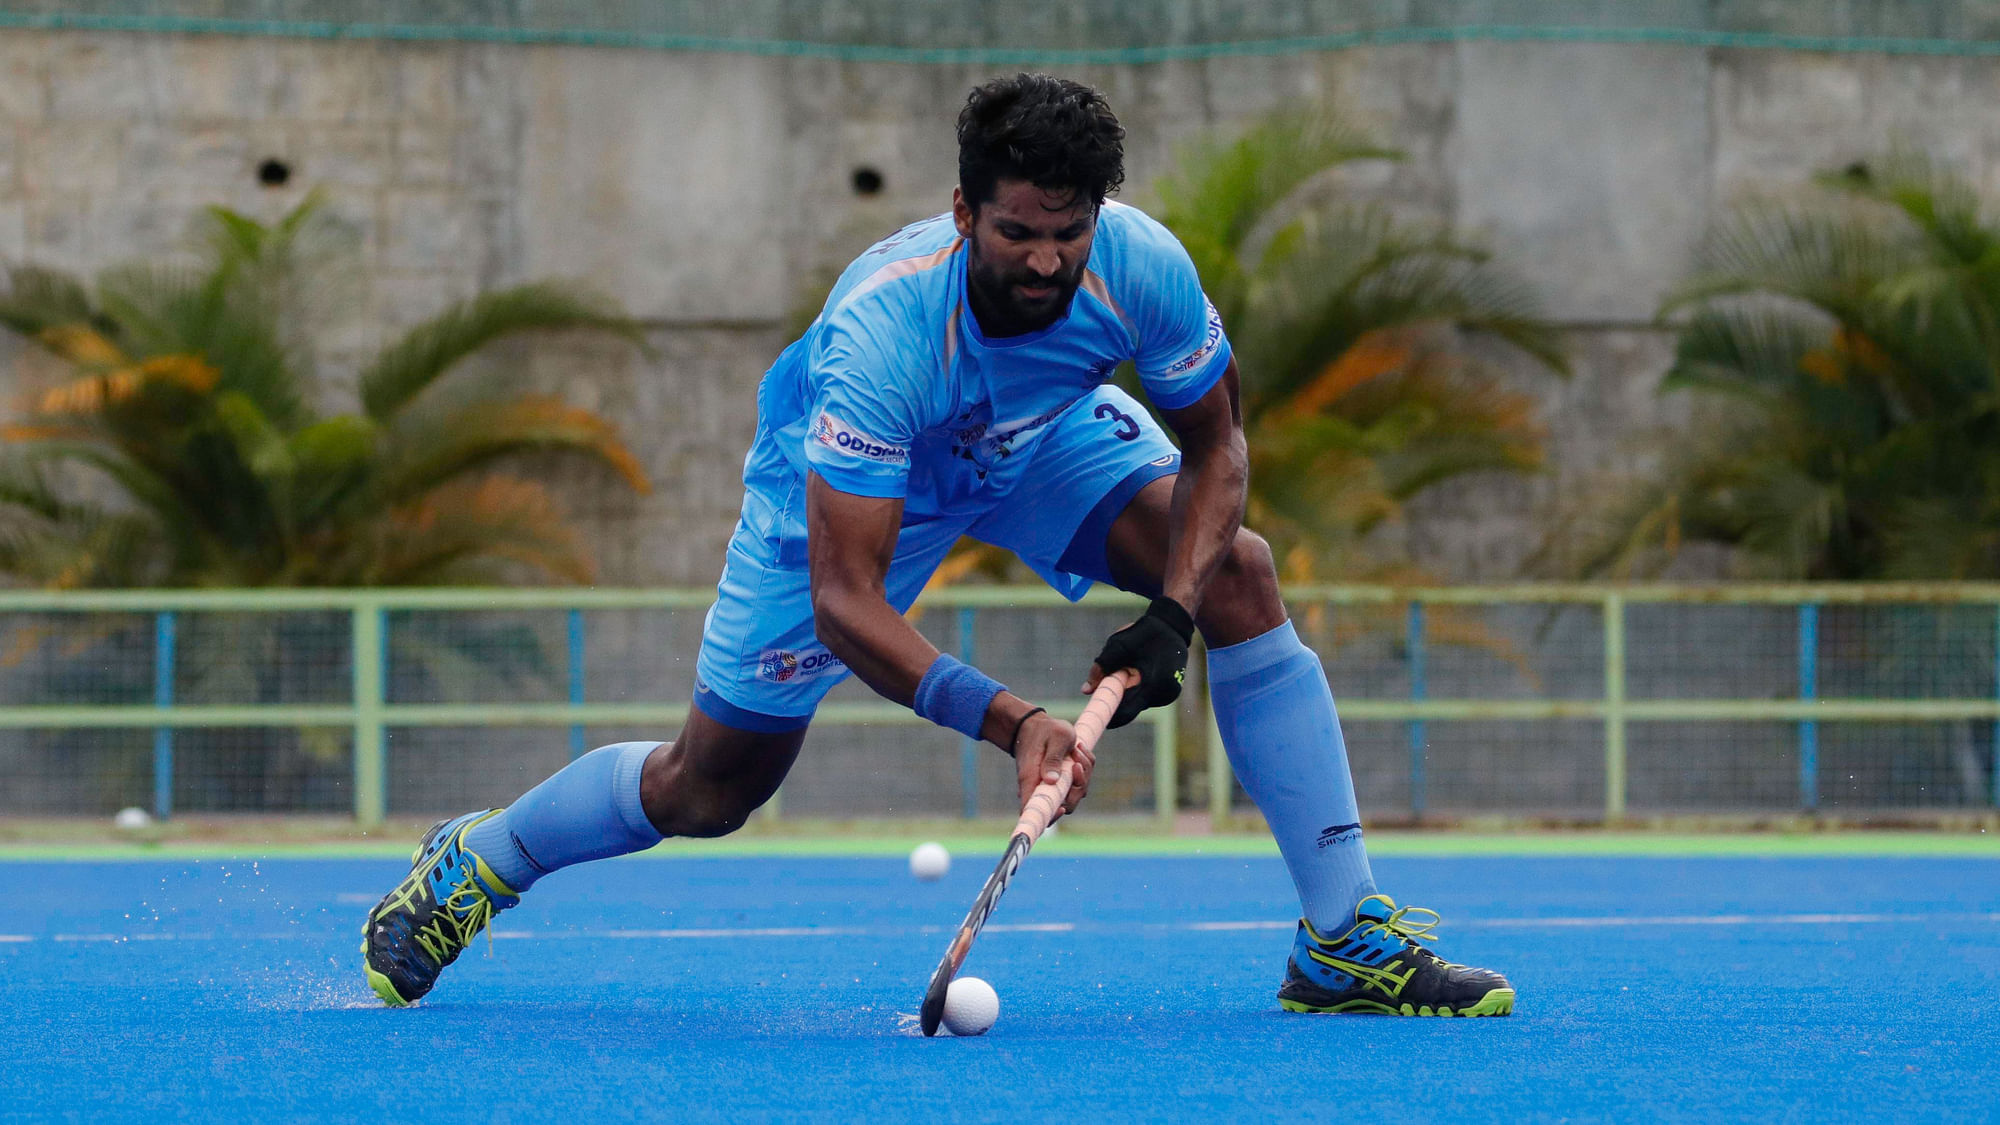 Rupinder Pal Singh says the Indian hockey team is eager to  win the gold medal at the Asian Games.